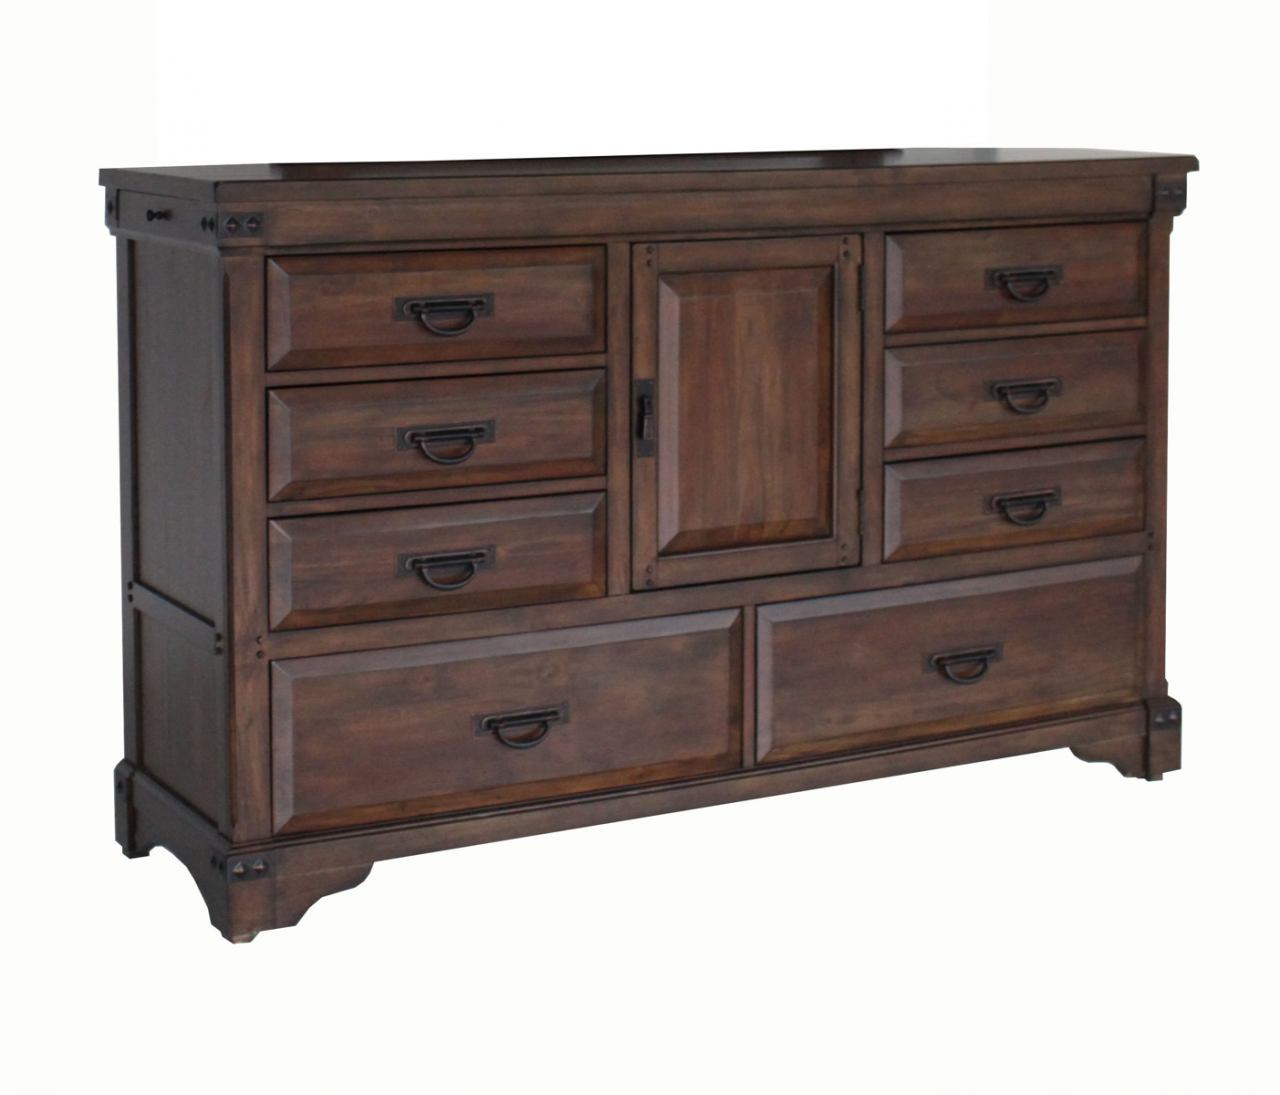 Aspen Village Lightly Distressed Toasted Mahogany Dresser by Avalon Furniture